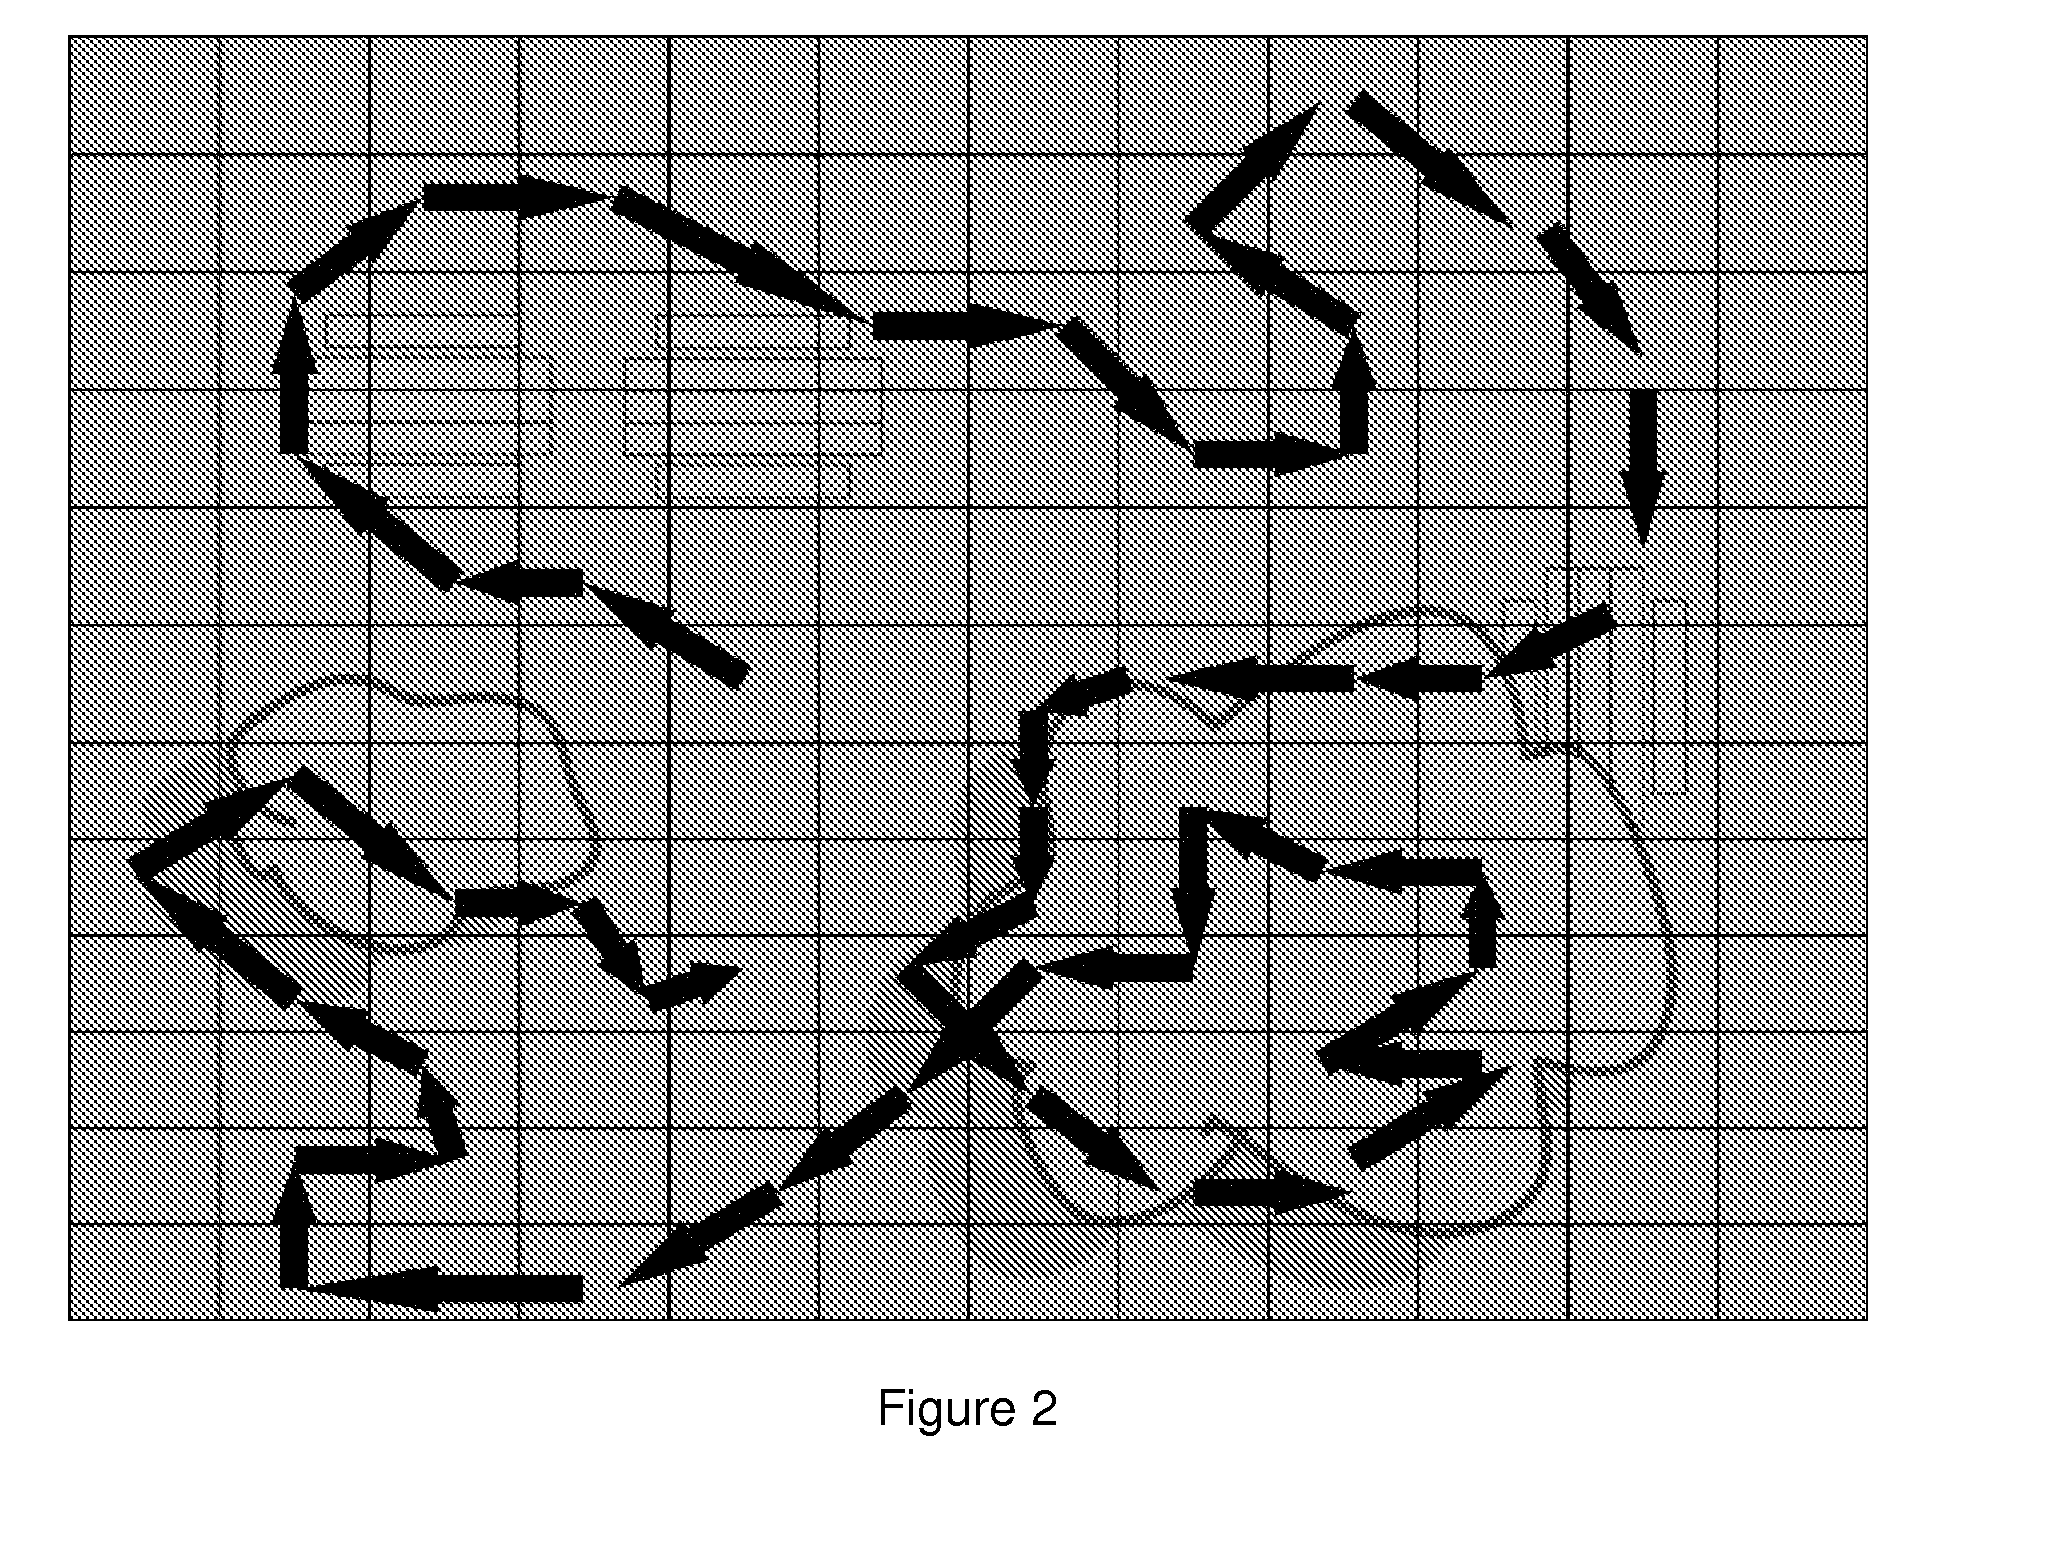 Device and method for measuring a quantity over a spatial region